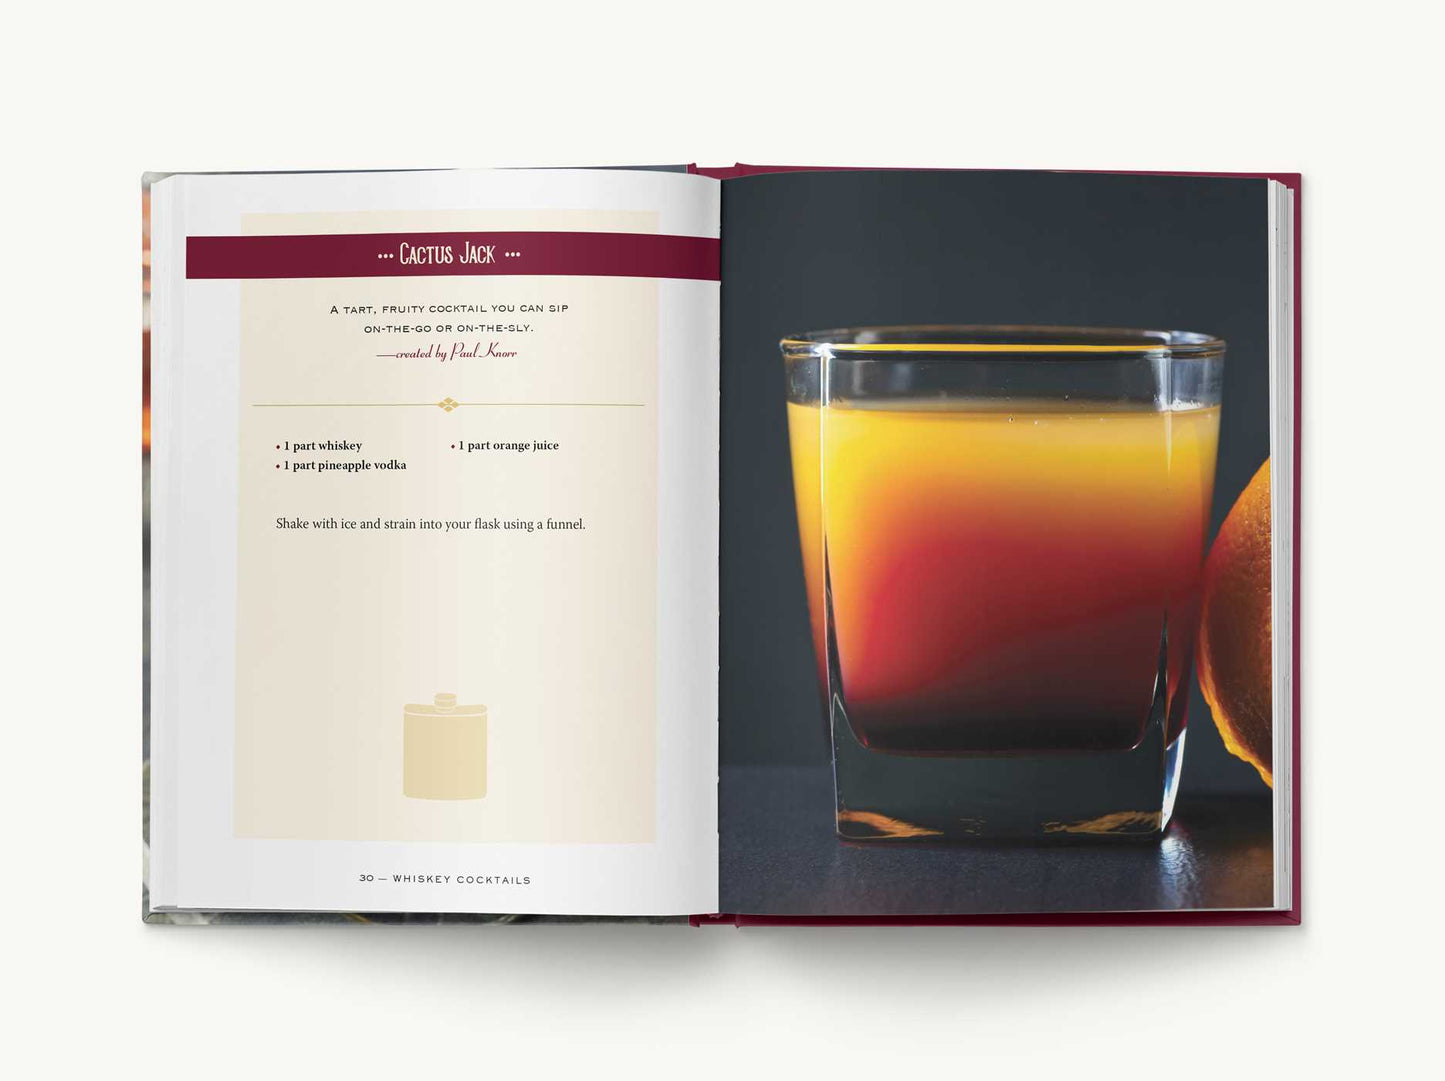 Whiskey Cocktails: A Curated Collection of Over 100 Recipes, From Old School Classics to Modern Originals (Cocktail Recipes, Whisky Scotch Bourbon Drinks, Home Bartender, Mixology, Drinks & Beverages Cookbook)